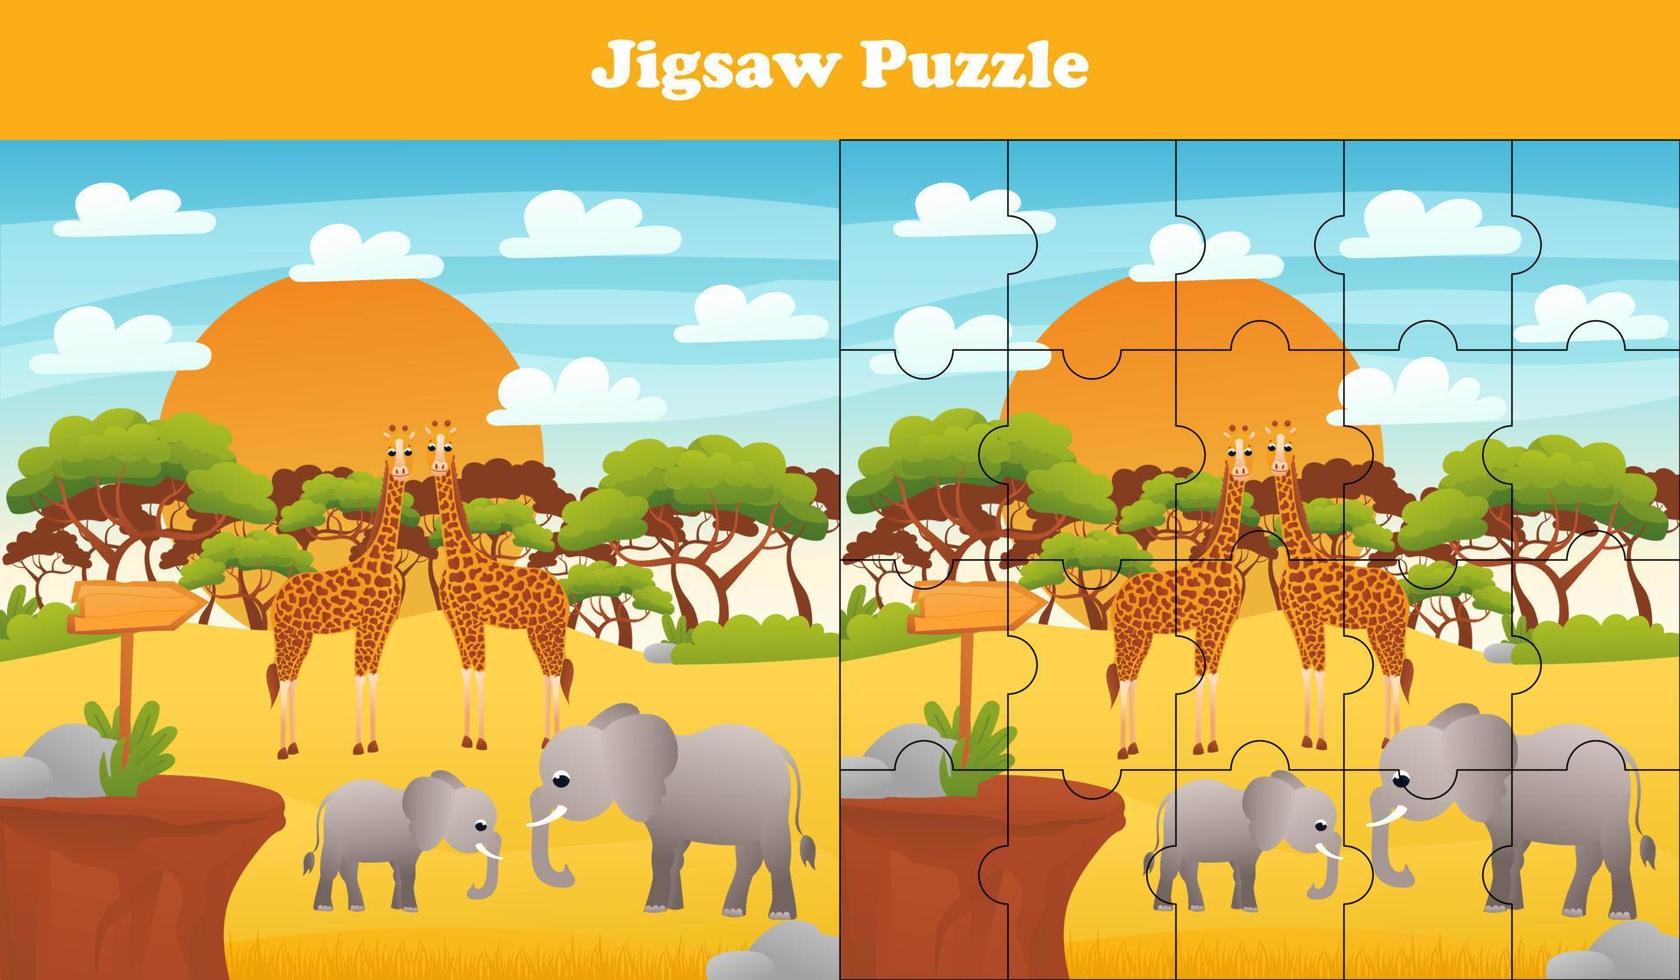 Cartoon vector illustration of educational jigsaw puzzle game for preschool children with funny giraffe and elephants